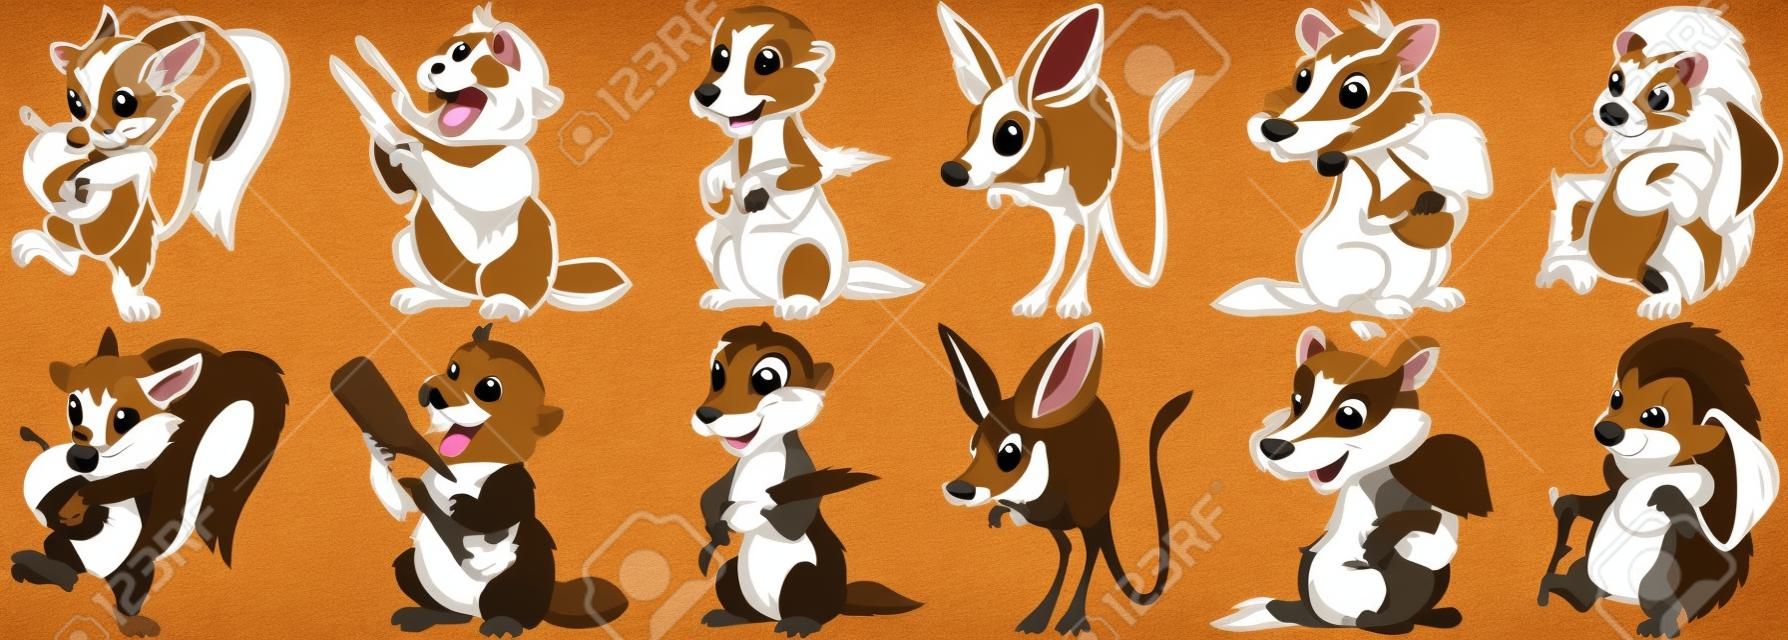 Cartoon animals set. Collection of wild mammals. Squirrel with acorn, beaver with wooden log, groundhog (marmot) with wheat ear, jumping jerboa, badger with mushroom, hedgehog with mushroom.